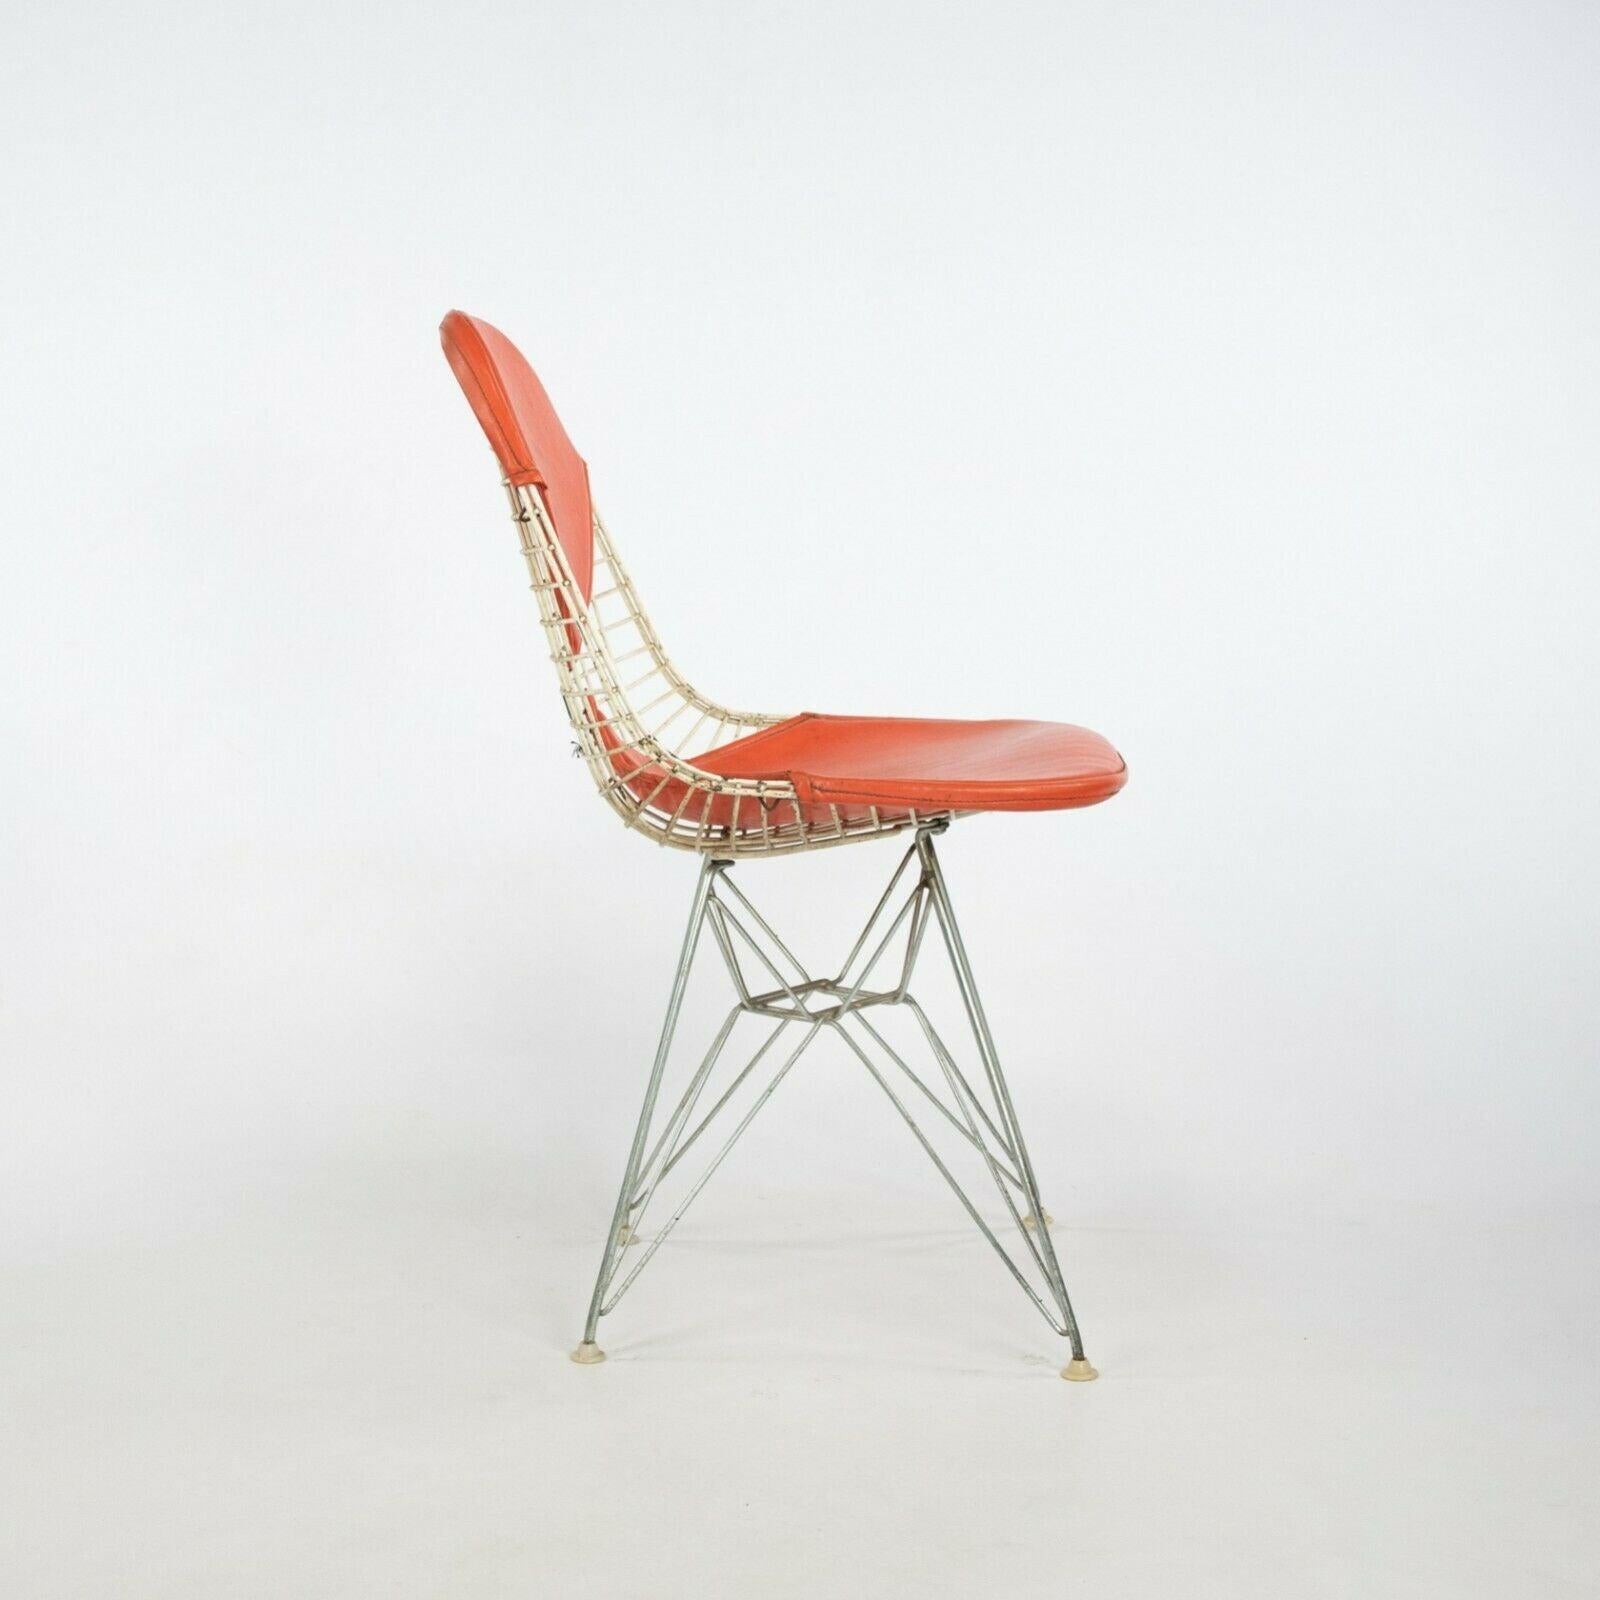 1957 Herman Miller Eames DKR-2 Dining / Side Chairs Set of Five with Orange Pads For Sale 1